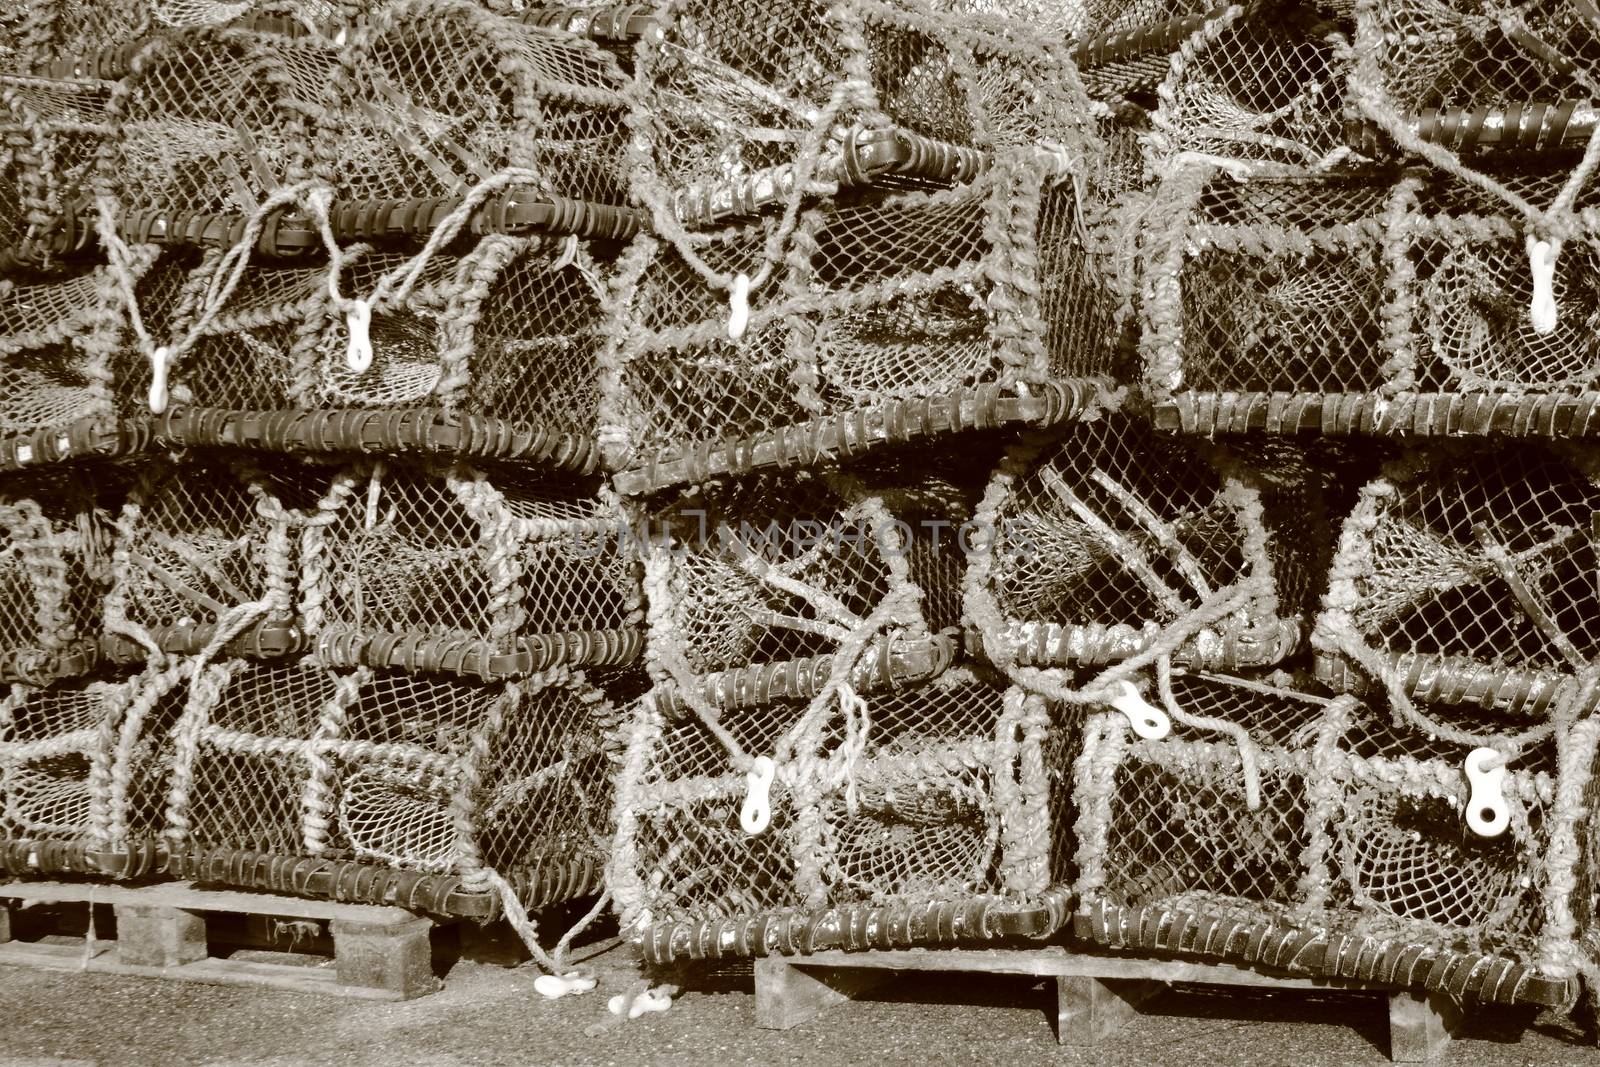 Pile of worn fishing traps for eels